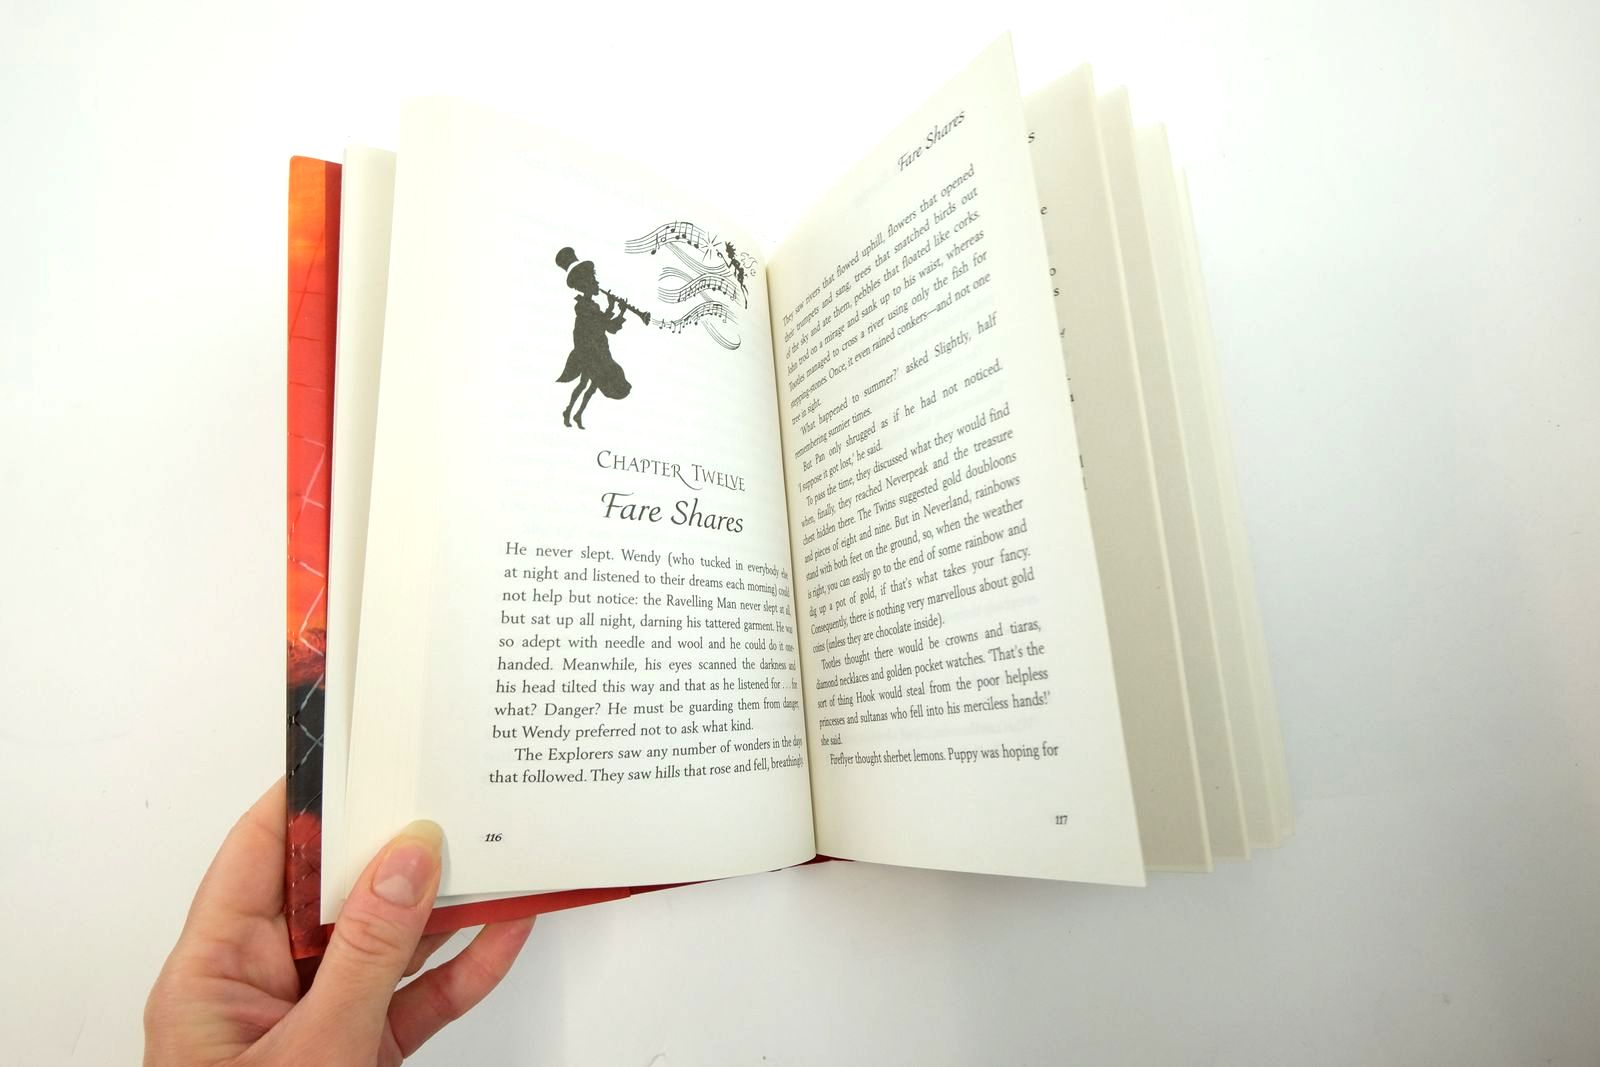 Photo of PETER PAN IN SCARLET written by McCaughrean, Geraldine illustrated by Wyatt, David published by Oxford University Press (STOCK CODE: 2139512)  for sale by Stella & Rose's Books